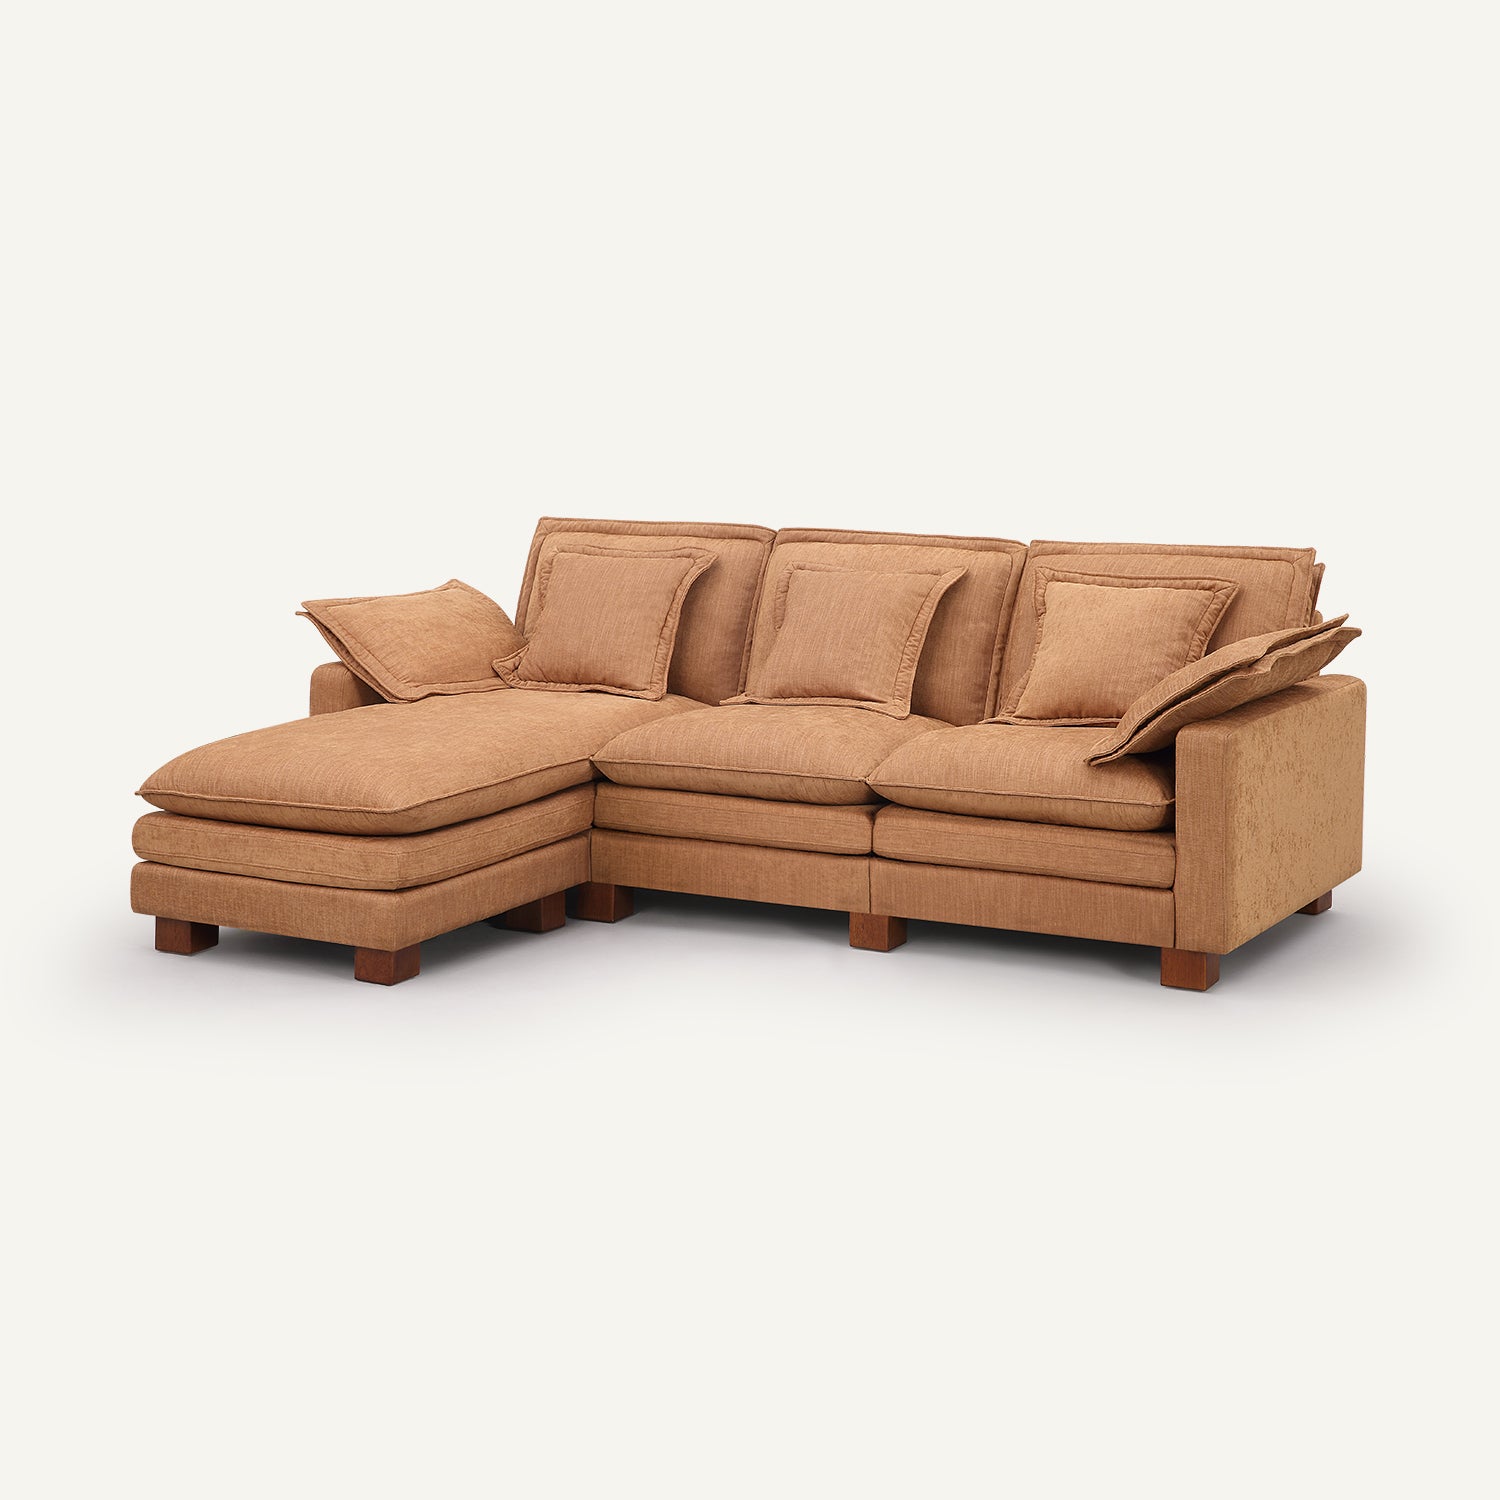 Stacked Tan Linen 3-Seat Sofa with Chaise